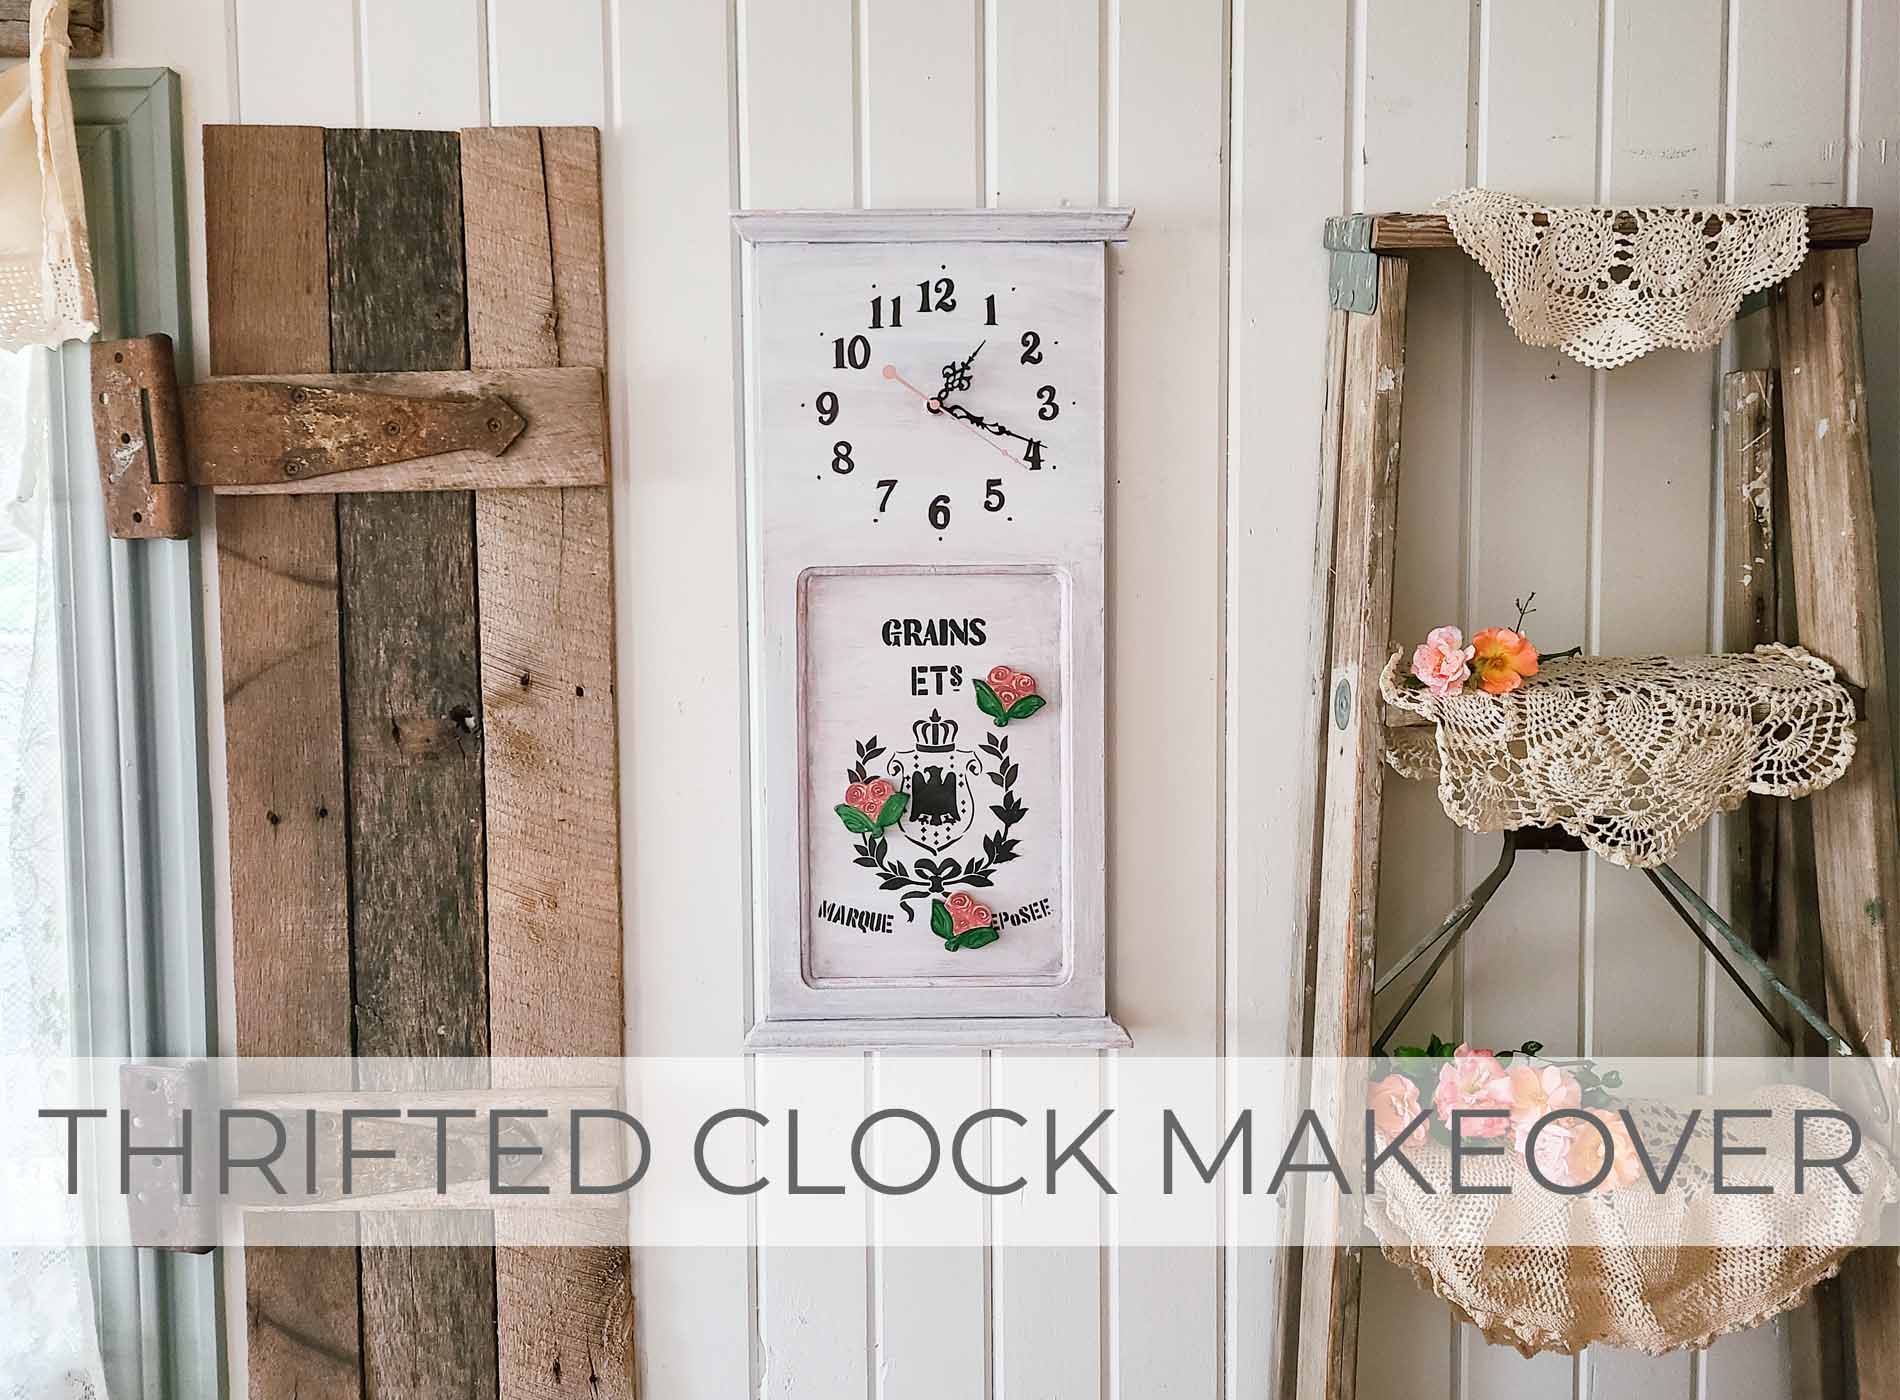 Showcase of Thrifted Clock Makeover by Larissa of Prodigal Pieces | prodigalpieces.com #prodigalpieces